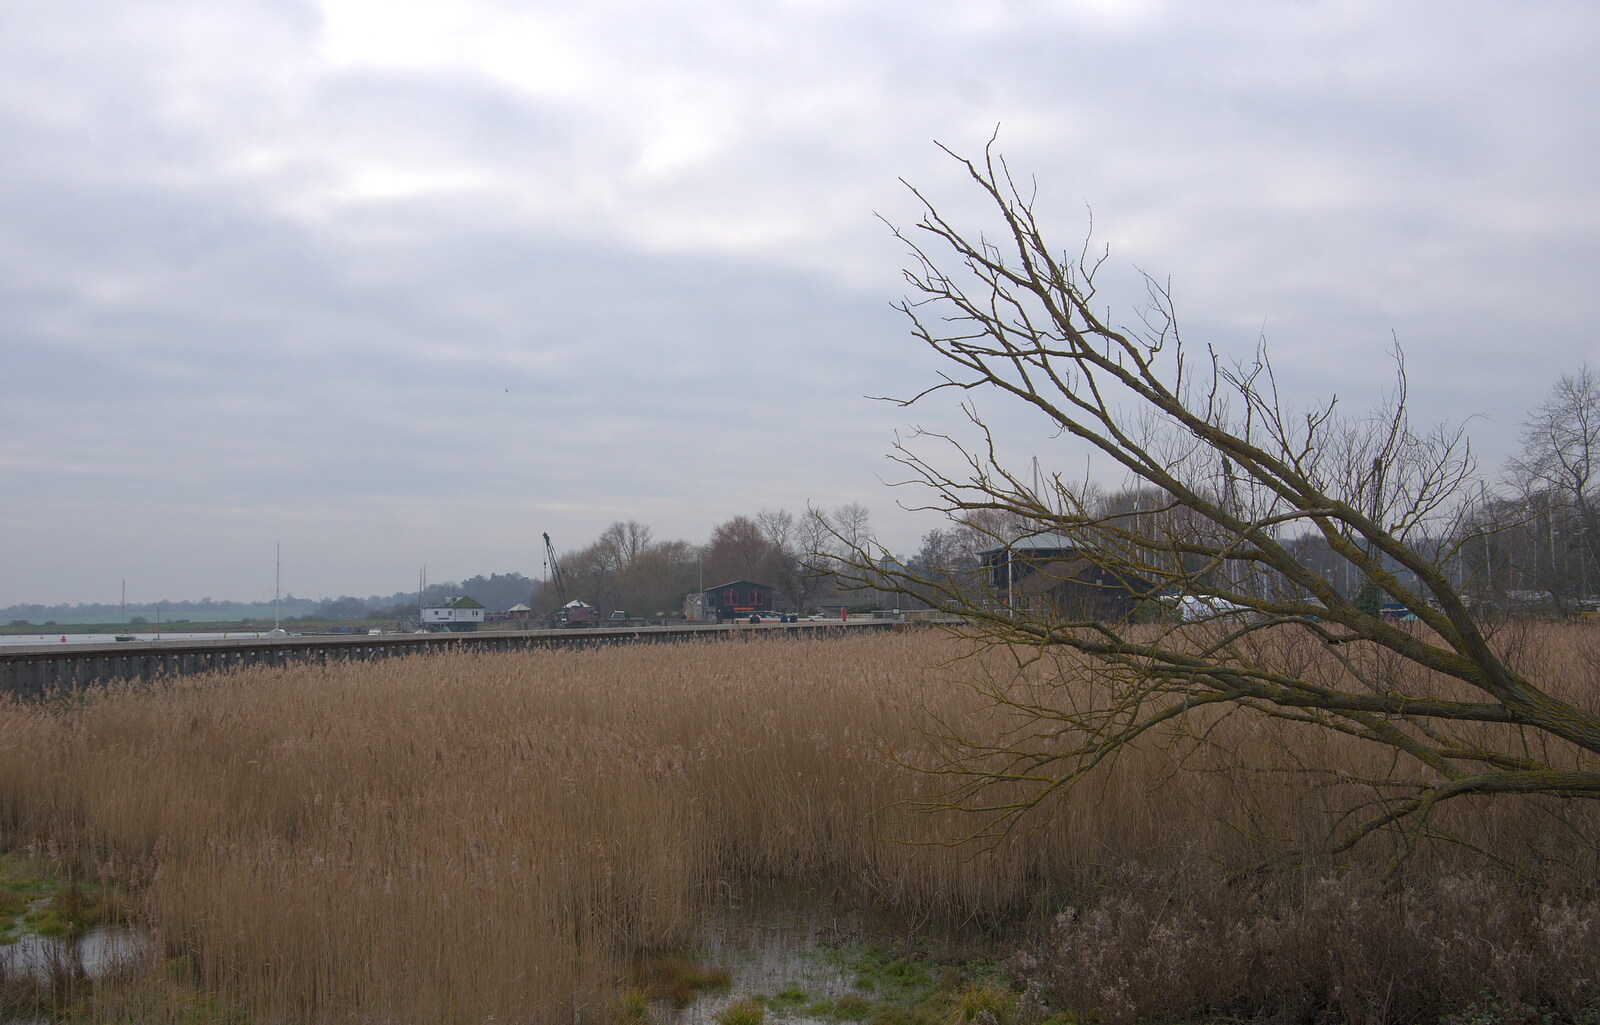 A leaning-over tree and the marshes from A Postcard From Woodbridge, Suffolk - 4th January 2019